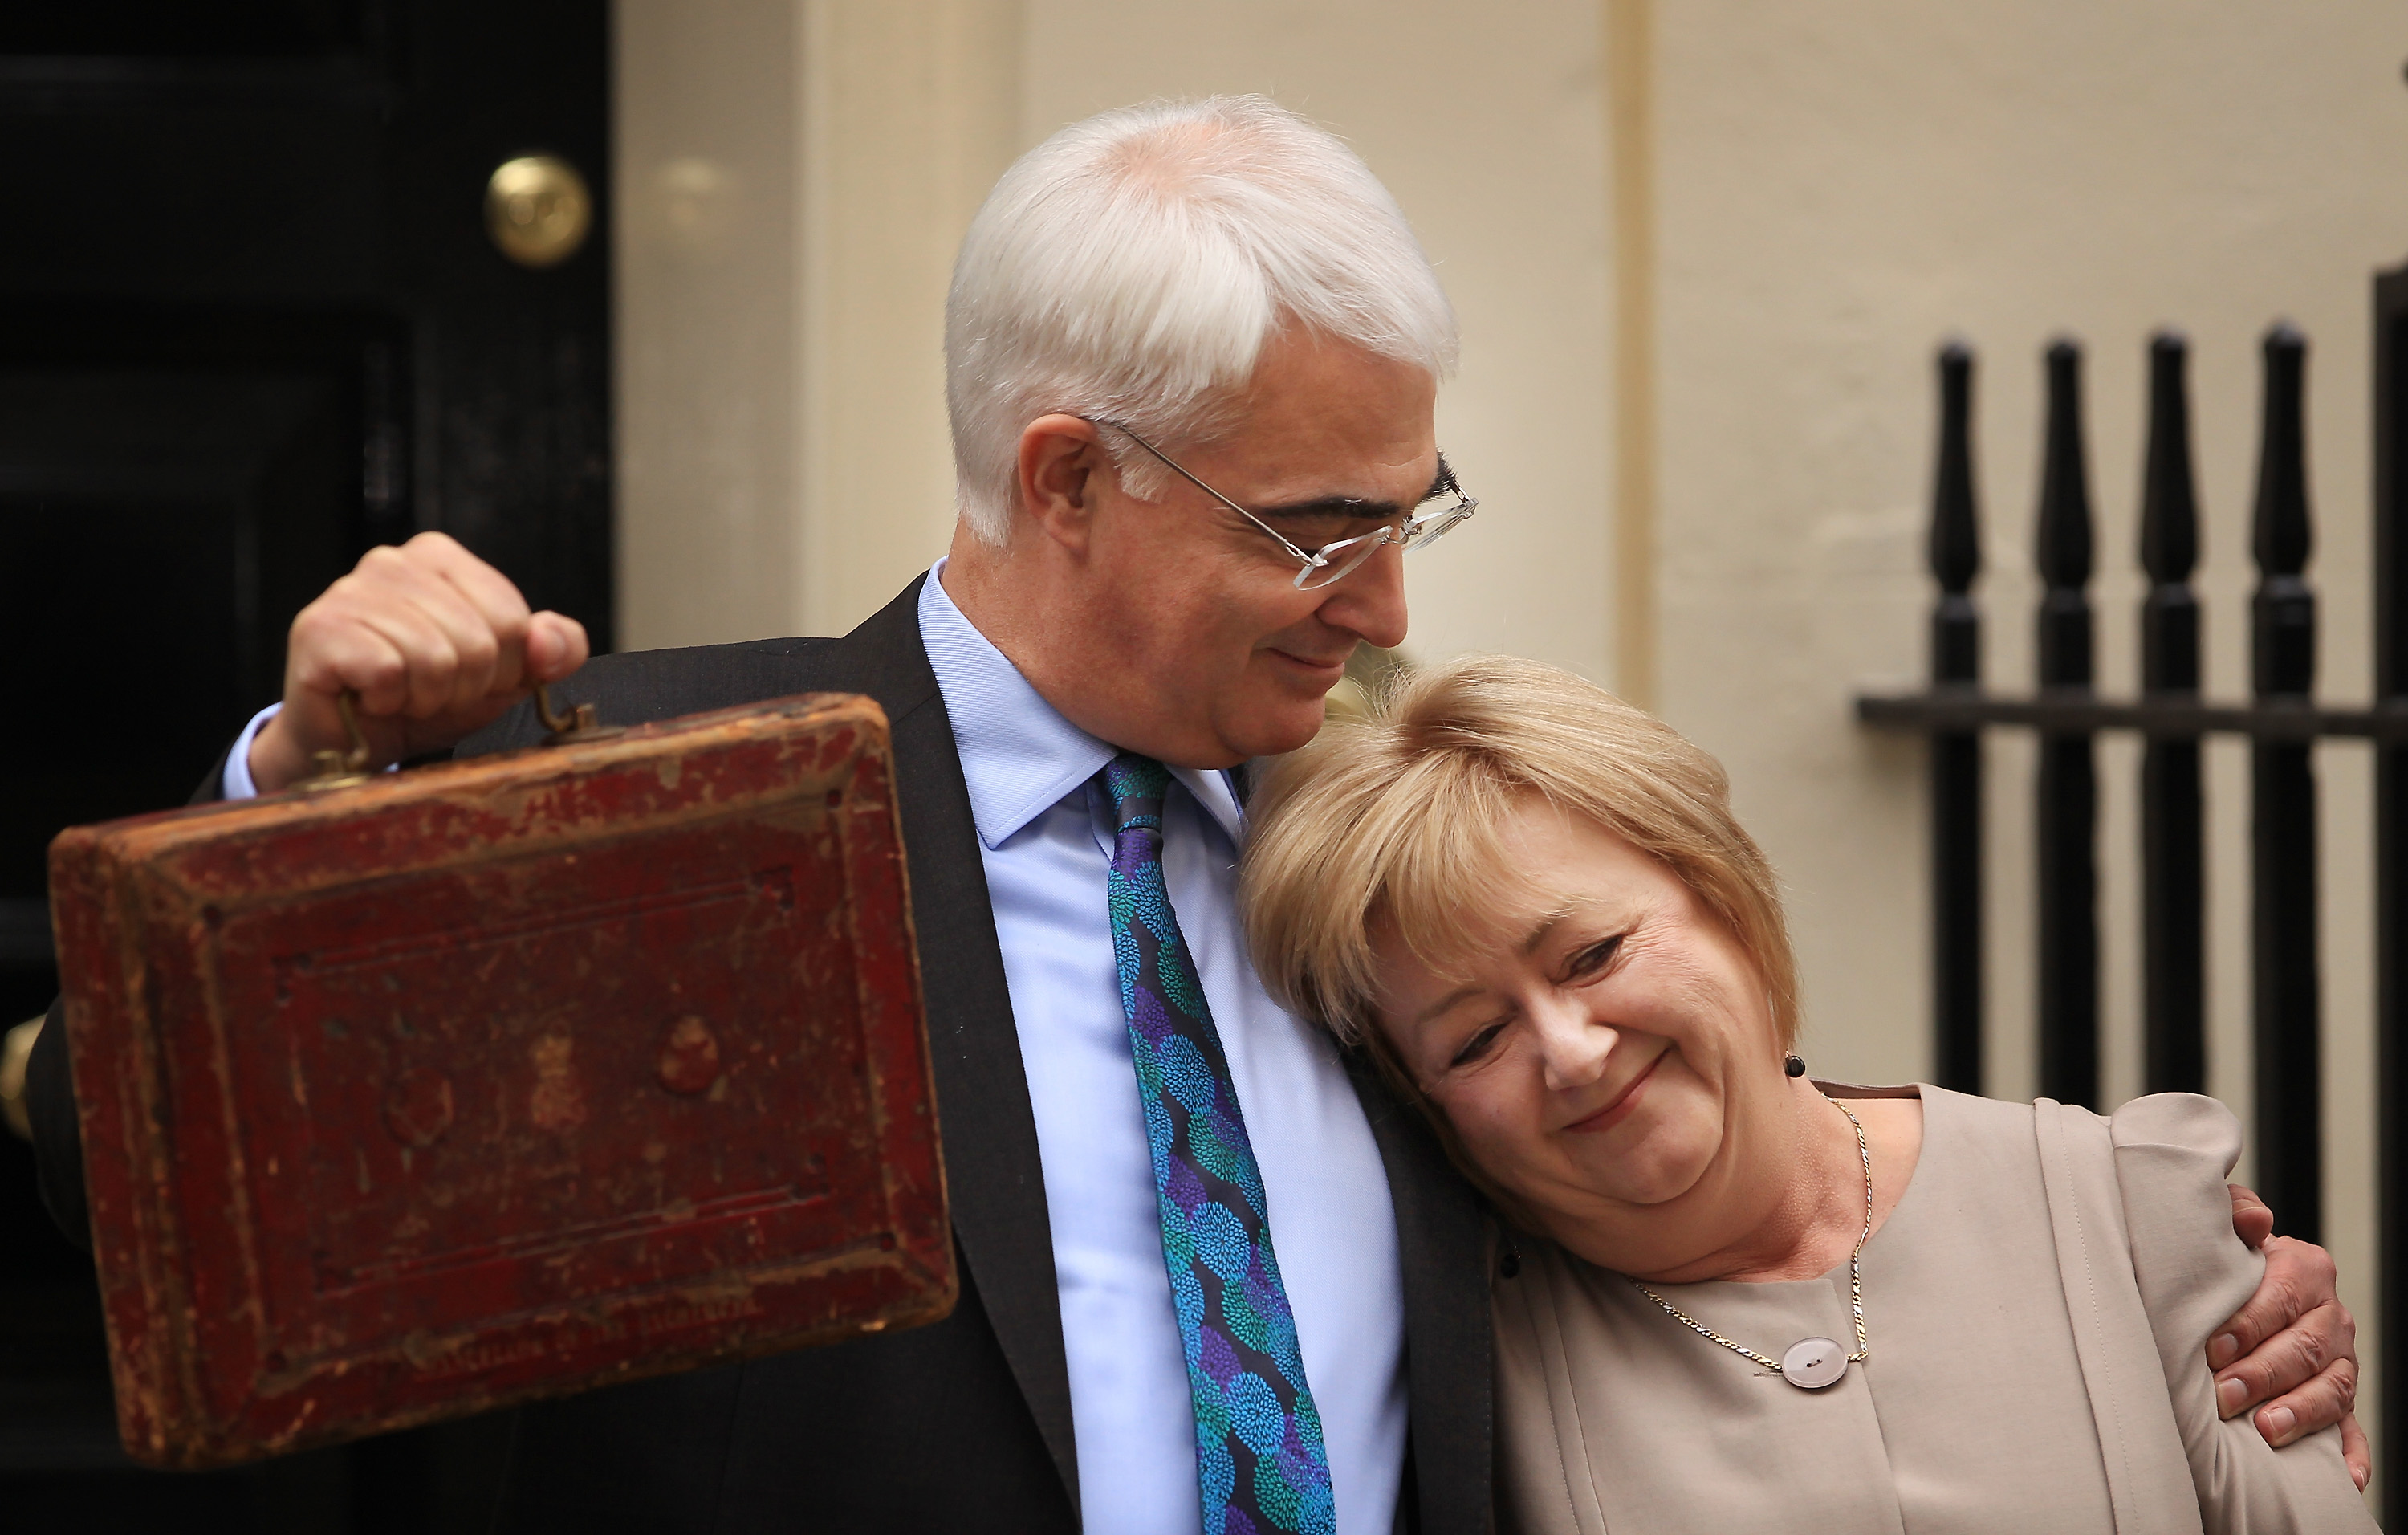 Then-Chancellor of the Exchequer Alistair Darling hugs his wife Maggie outside number 11 Downing Street on March 24, 2010.